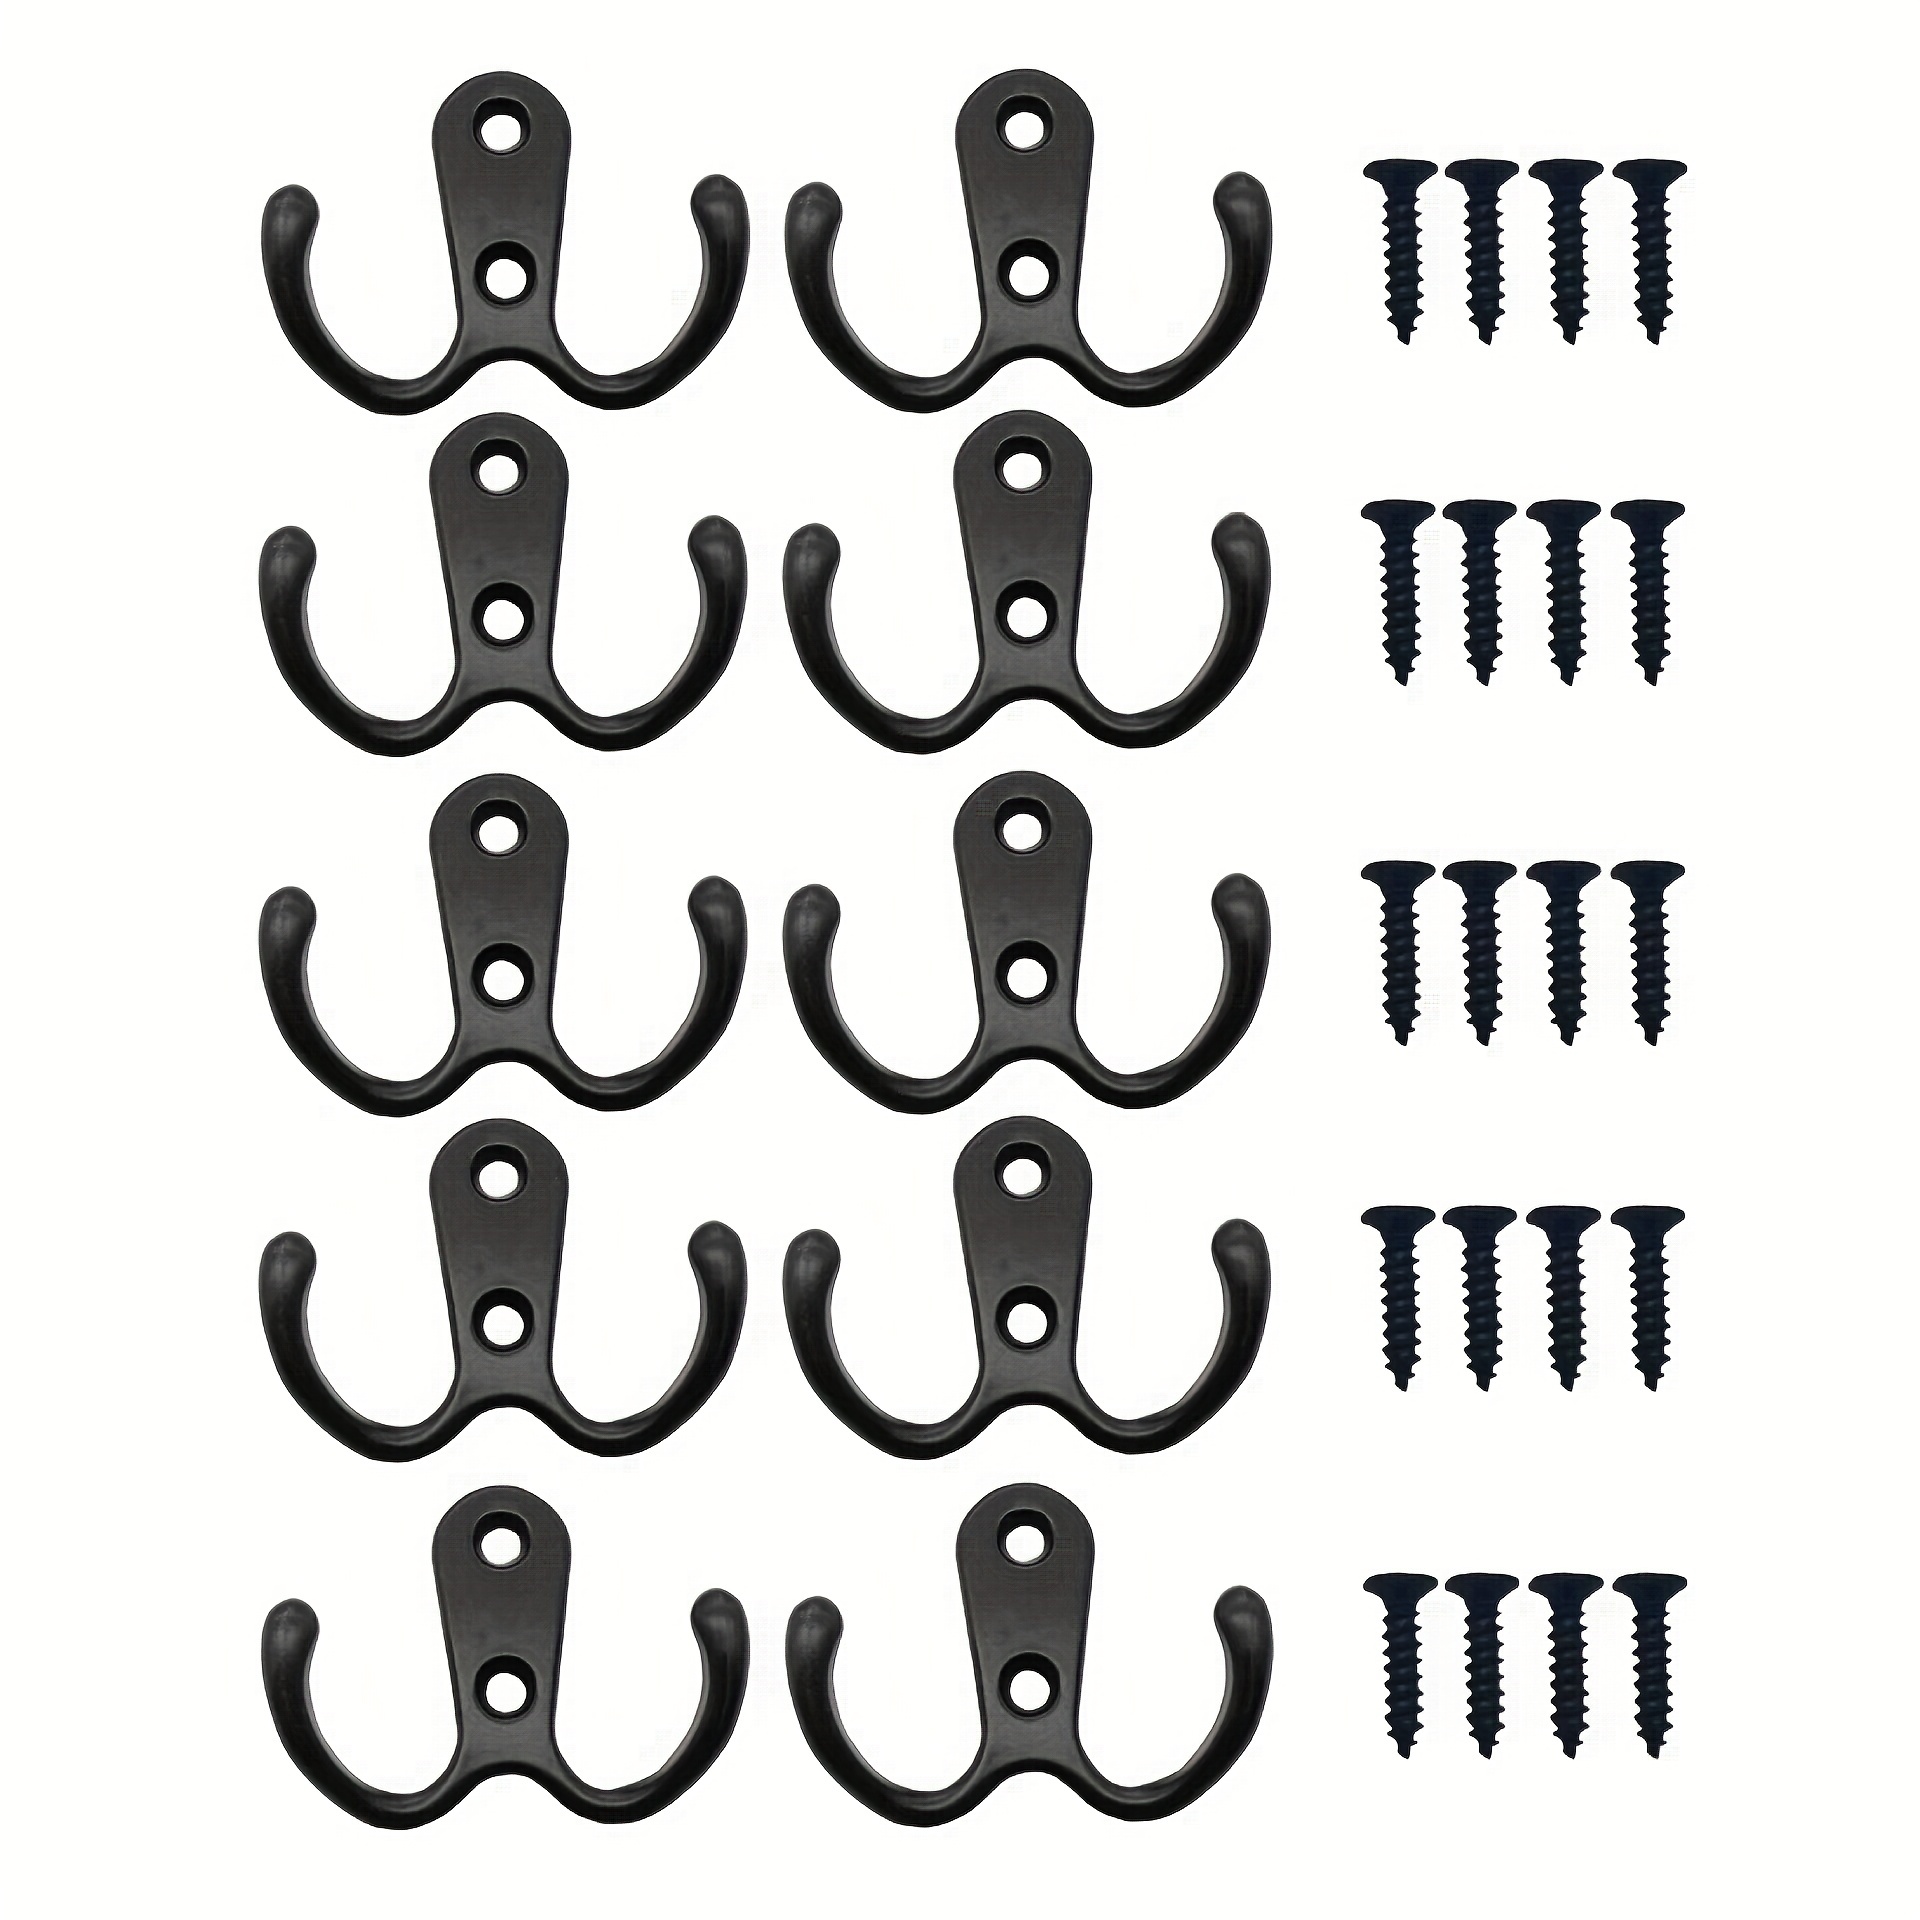 10 Pieces, Coat Hook Wall-mounted, Heavy-duty Metal Double Hook With 20  Screws, Wall Single Hook Hanging Robes, Towels, Keys, Jackets, Clothes,  Hats